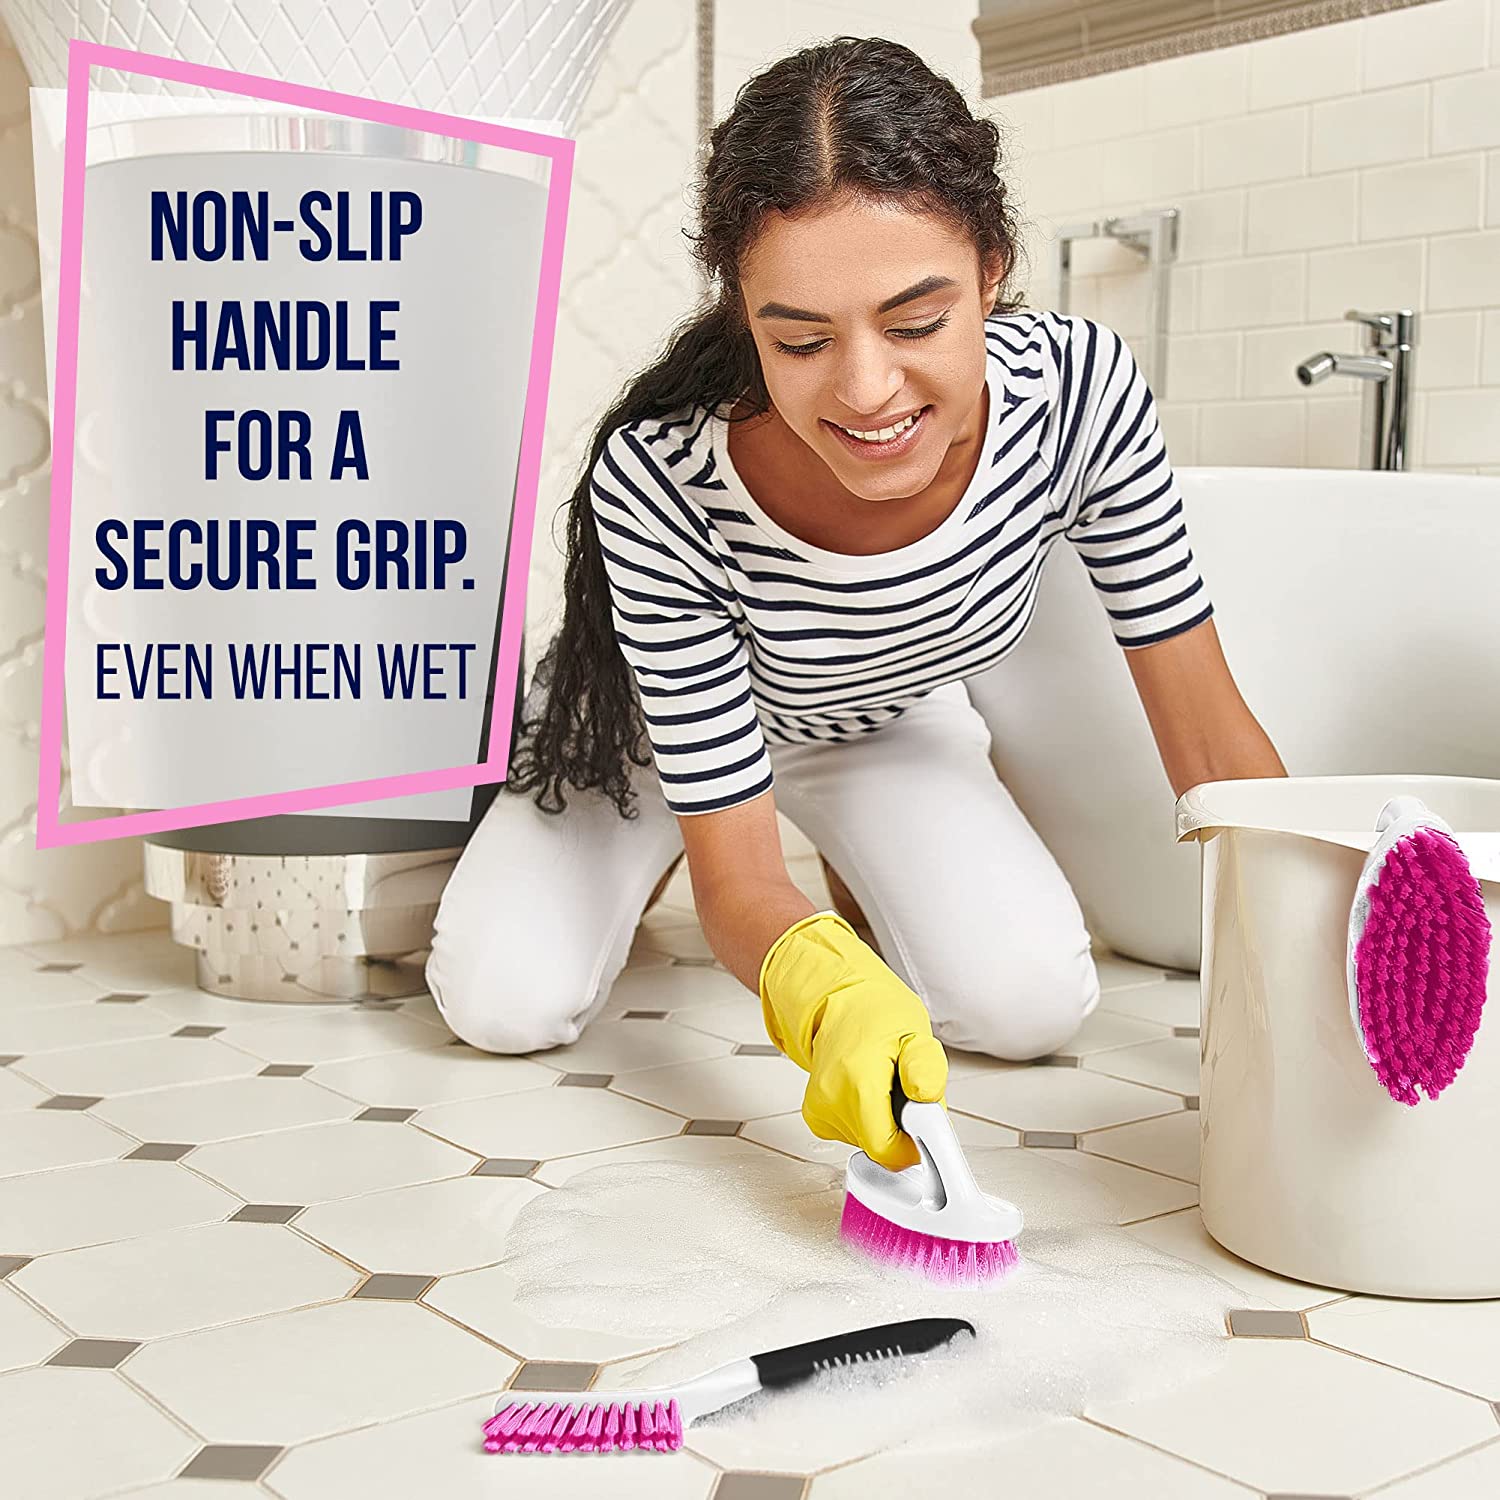 Tile Brushes (3 In 1) Grout Cleaner Joint Scrubber For Deep Cleaning